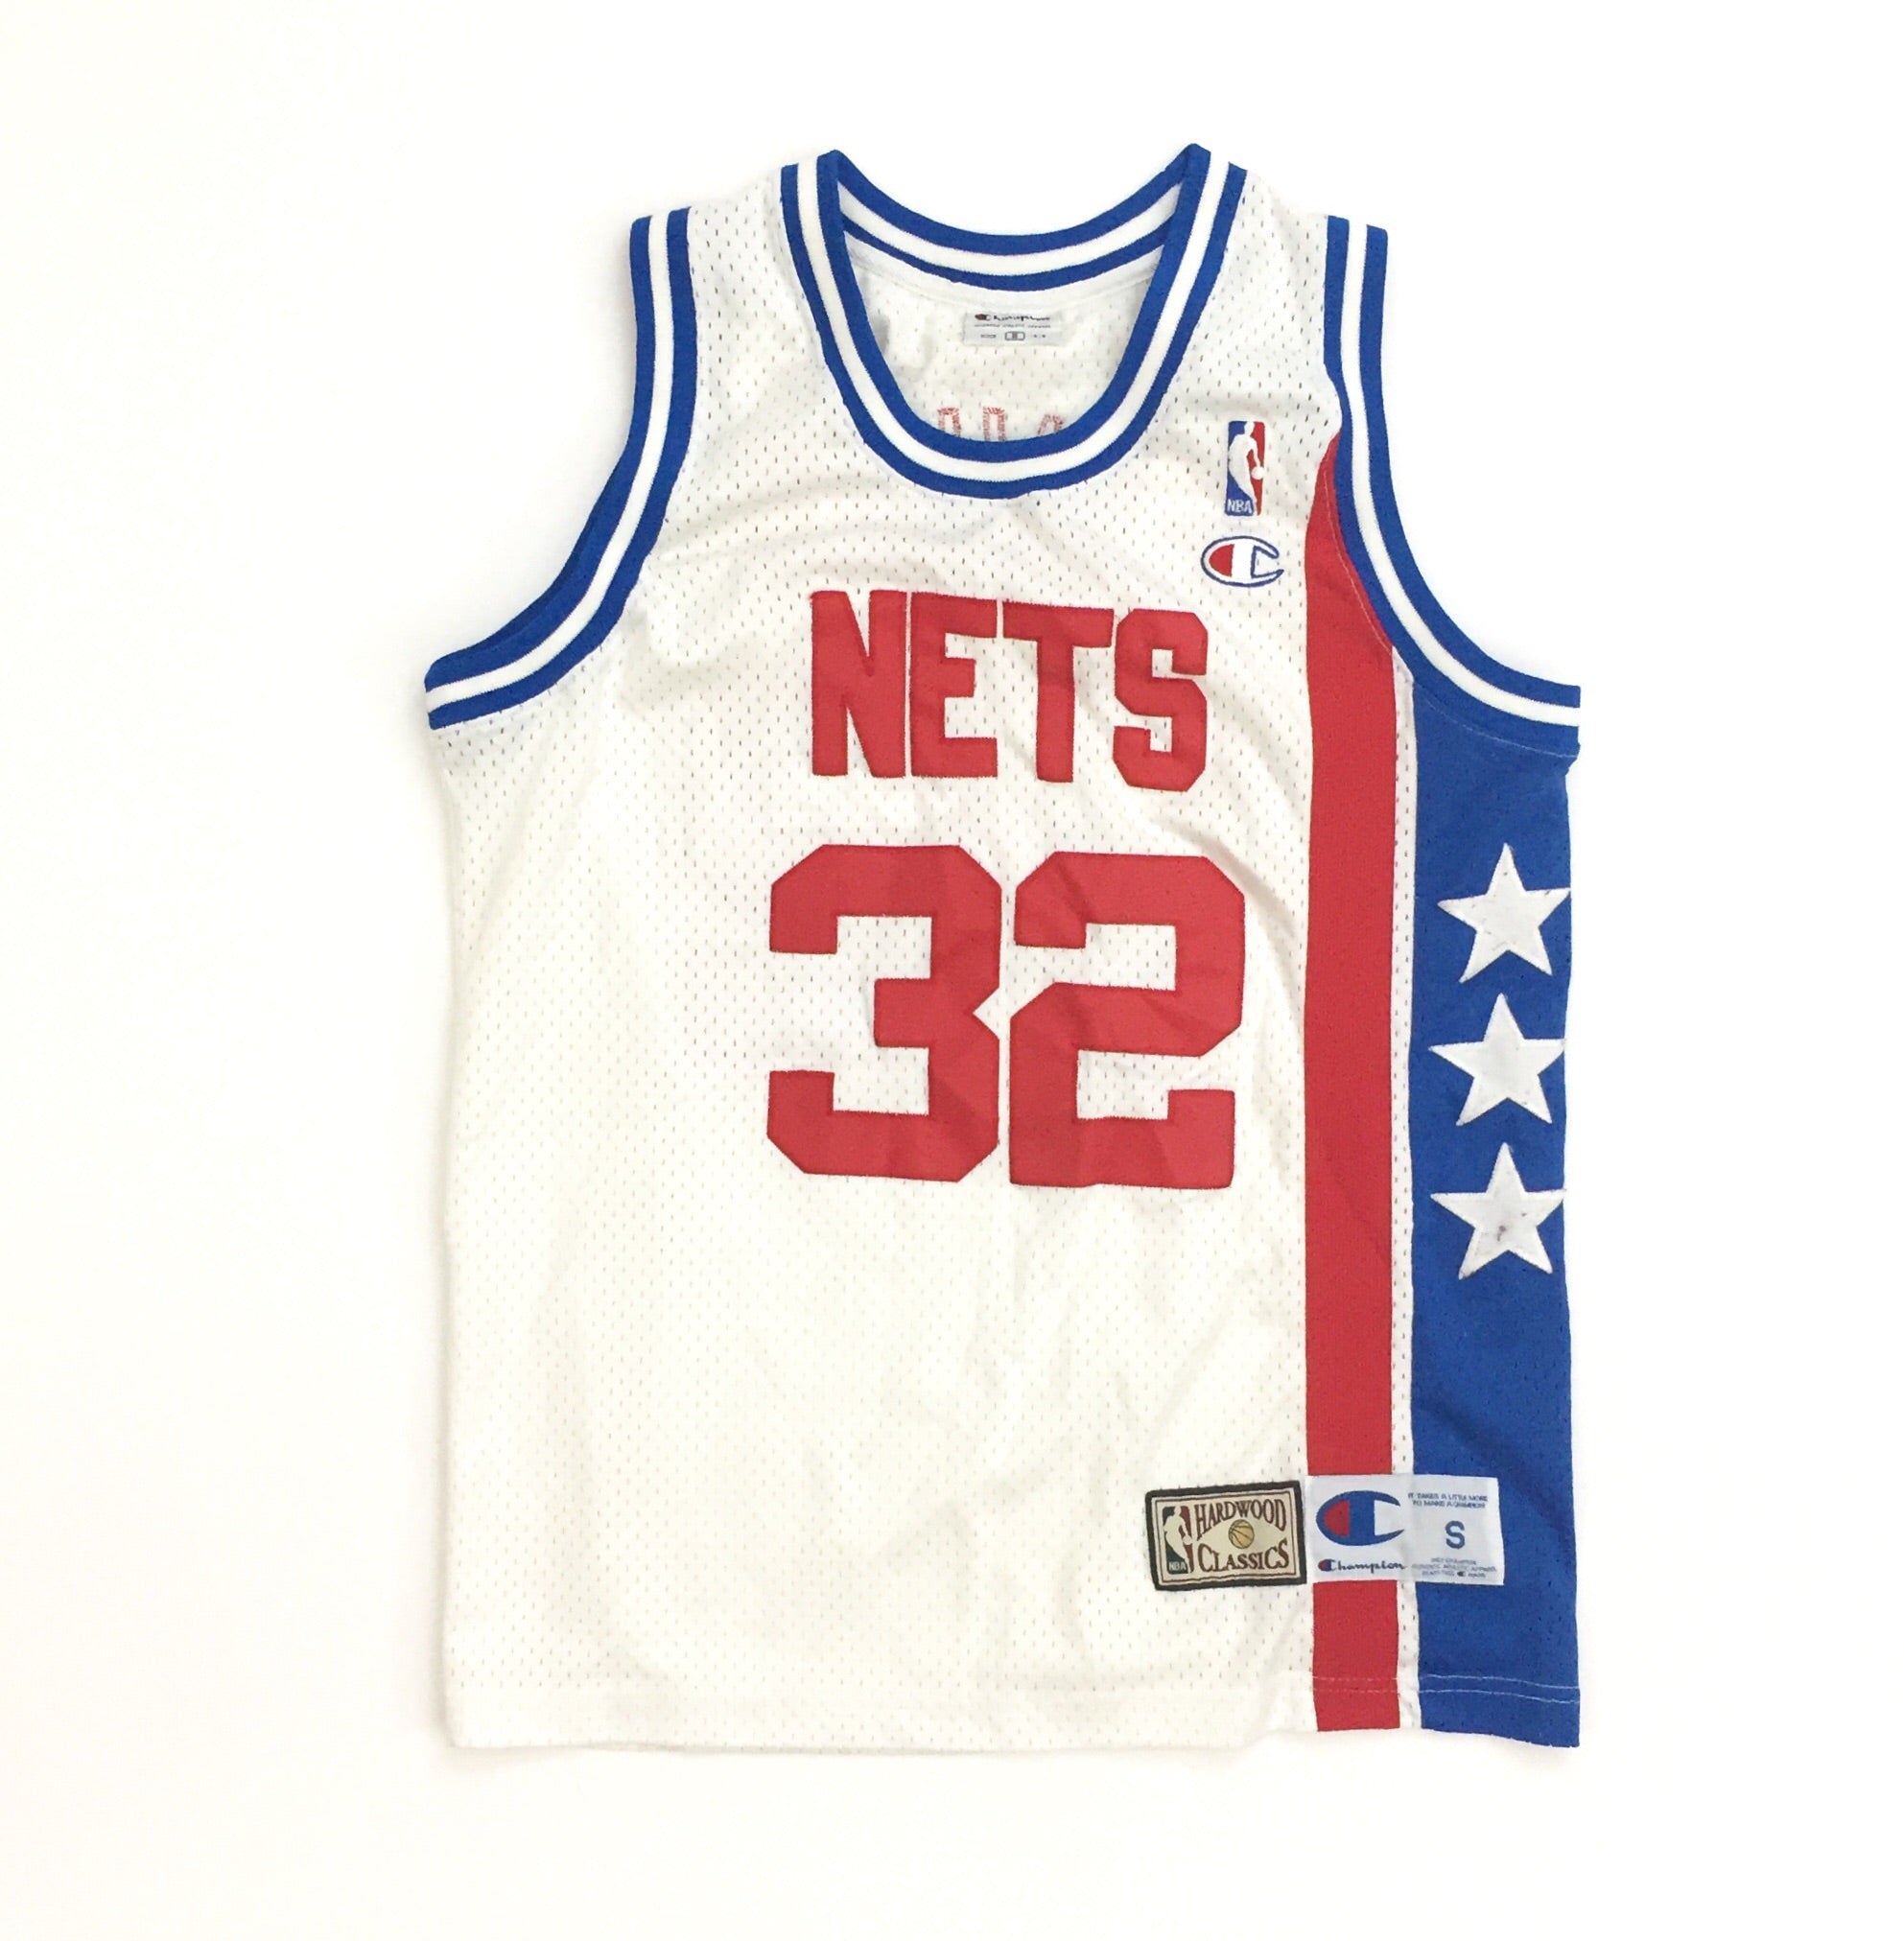 Vintage Champion NBA basketball jerseys - clothing & accessories - by owner  - apparel sale - craigslist